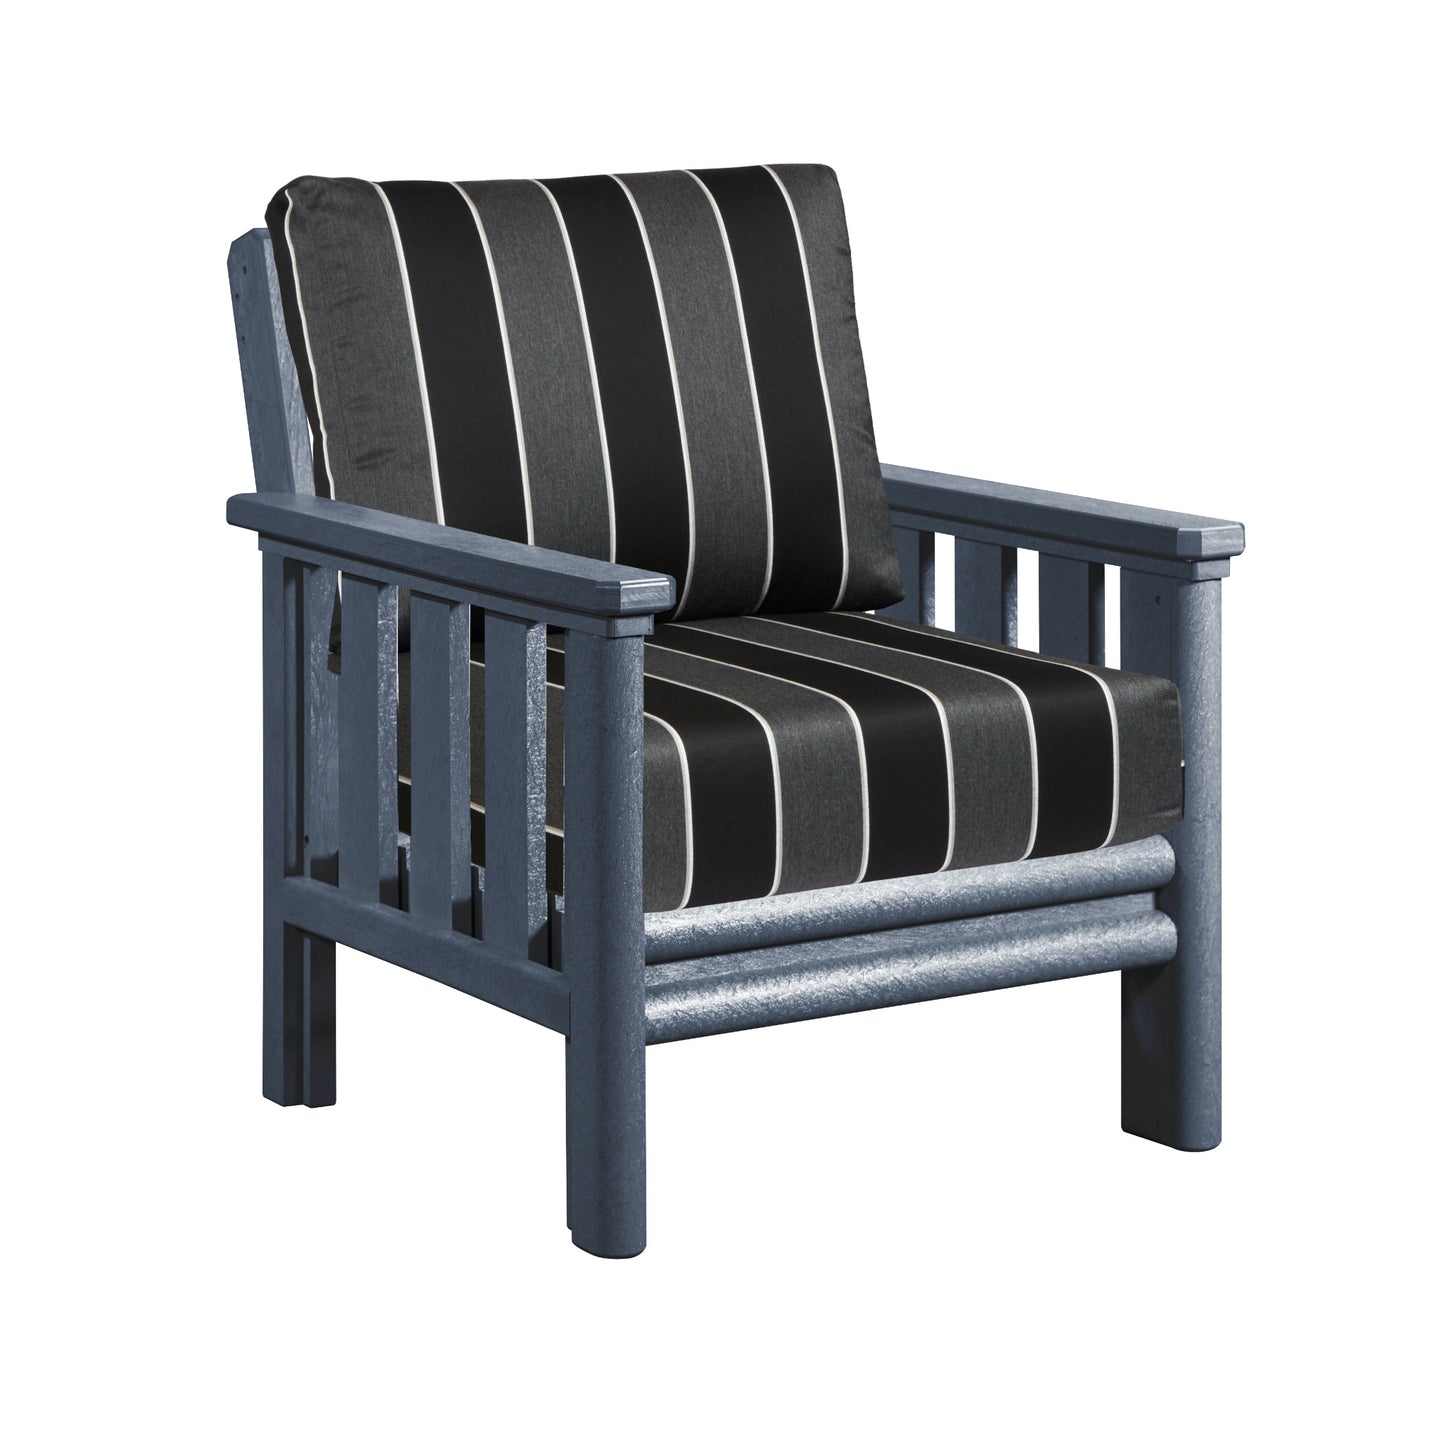 Stratford Arm Chair - SLATE GREY FRAME WITH CUSHIONS - DSF261-18 [DSF141]